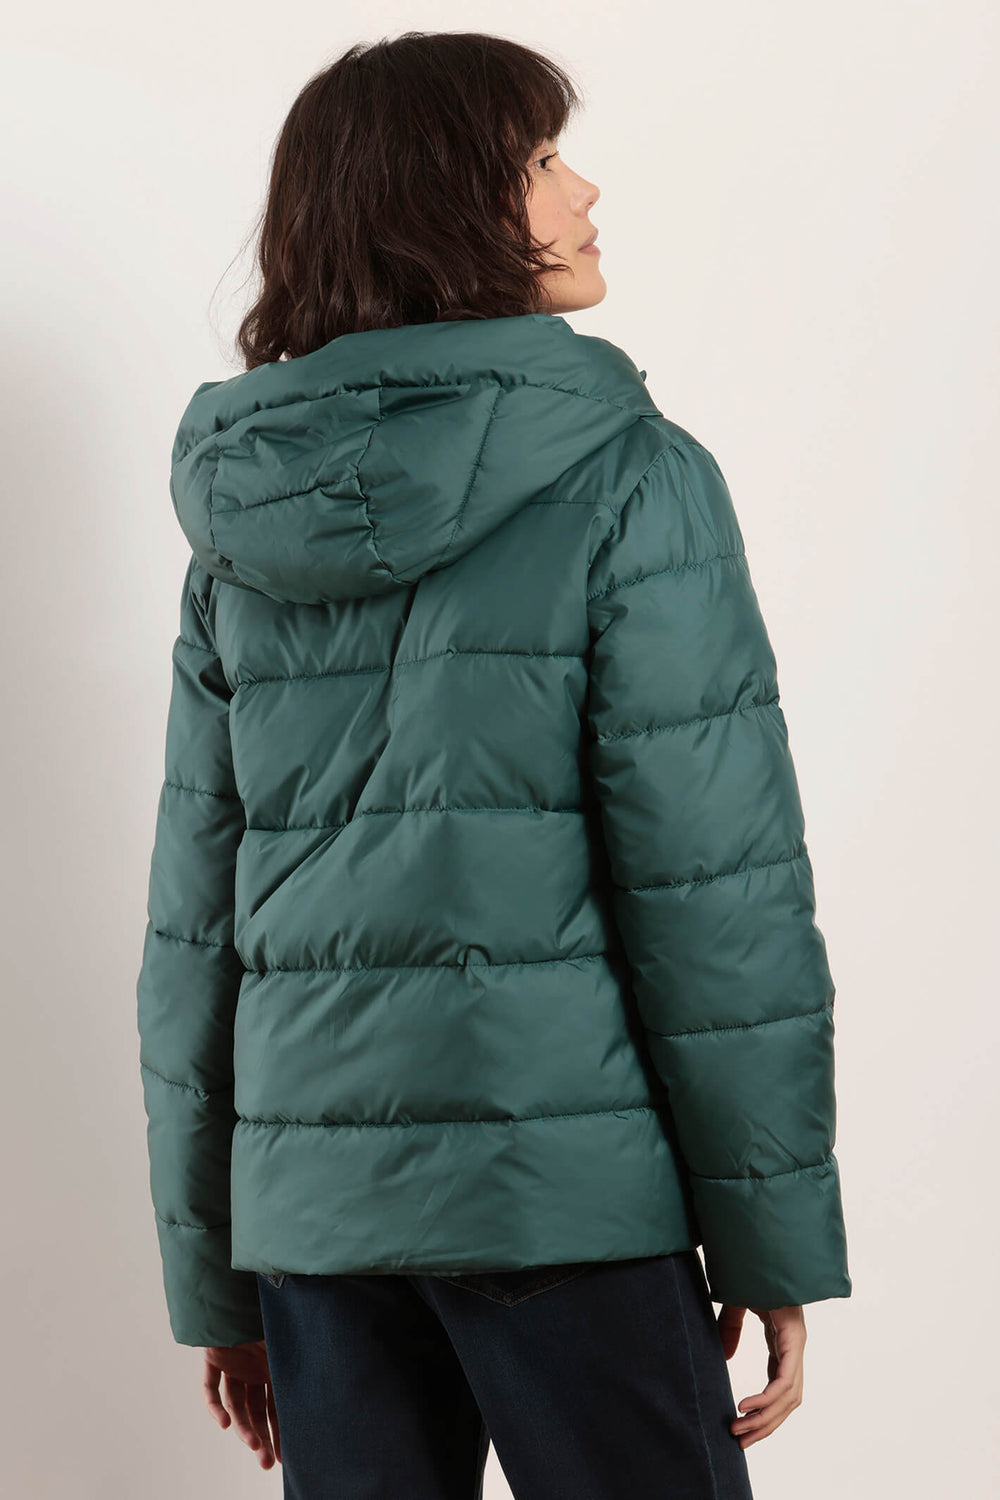 Mat De Misaine Fuga 094 Pin Maritime Green Padded Jacket With Hood - Shirley Allum Boutique